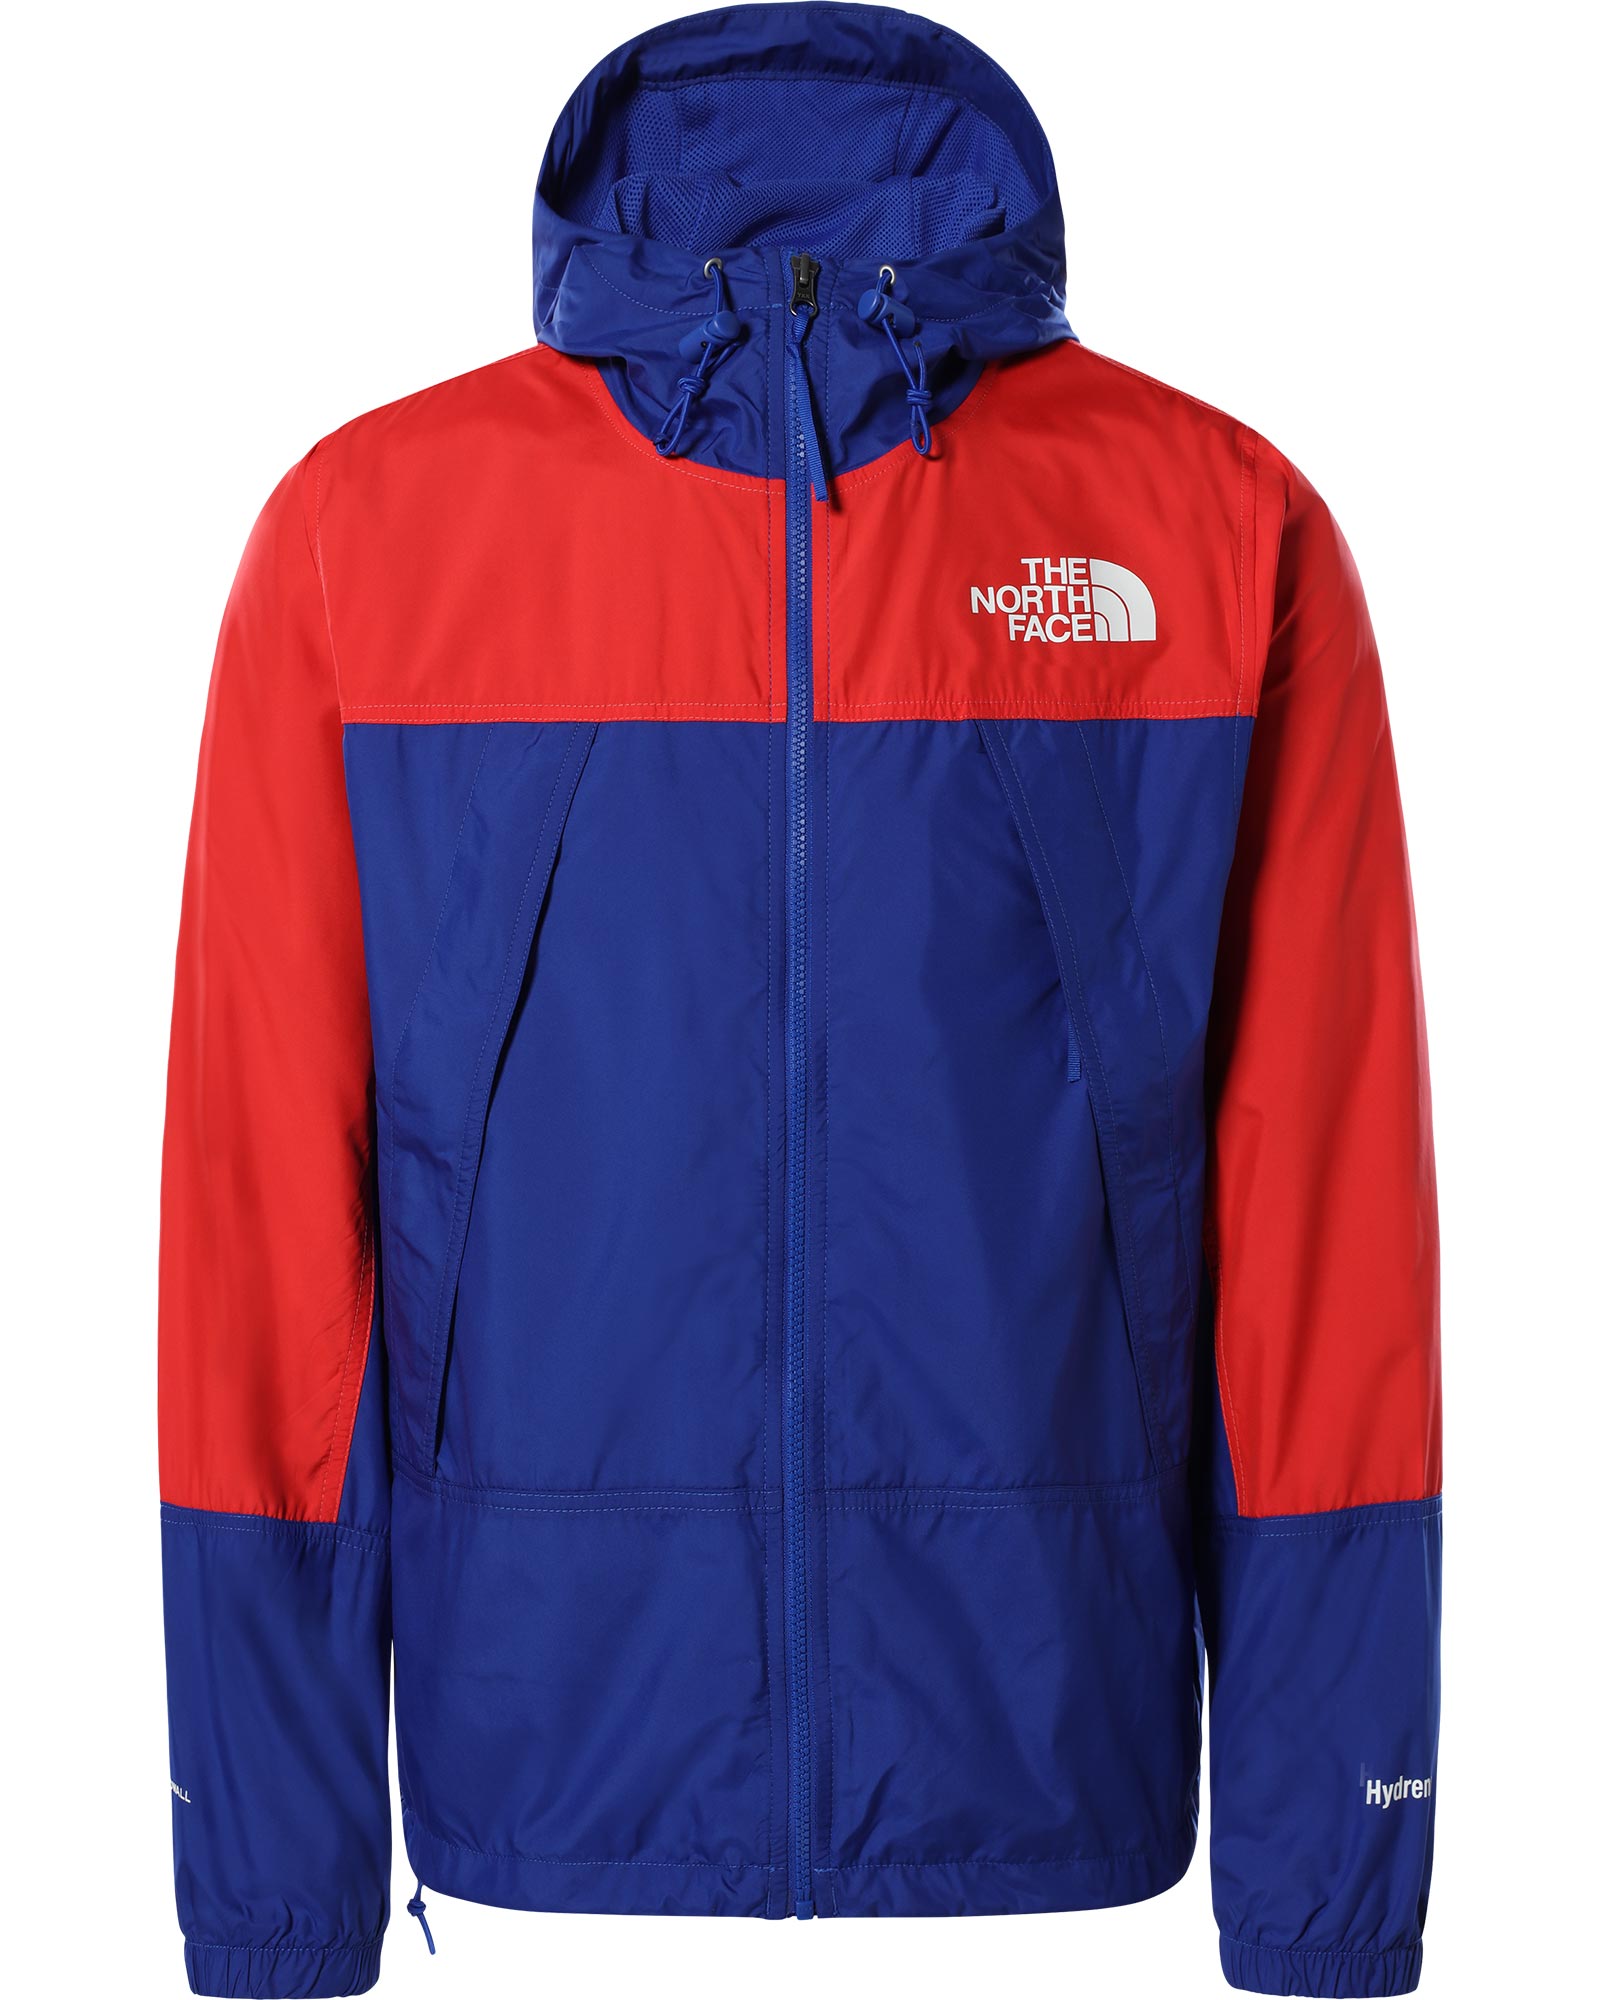 The North Face Hydrenaline Wind Mens Jacket